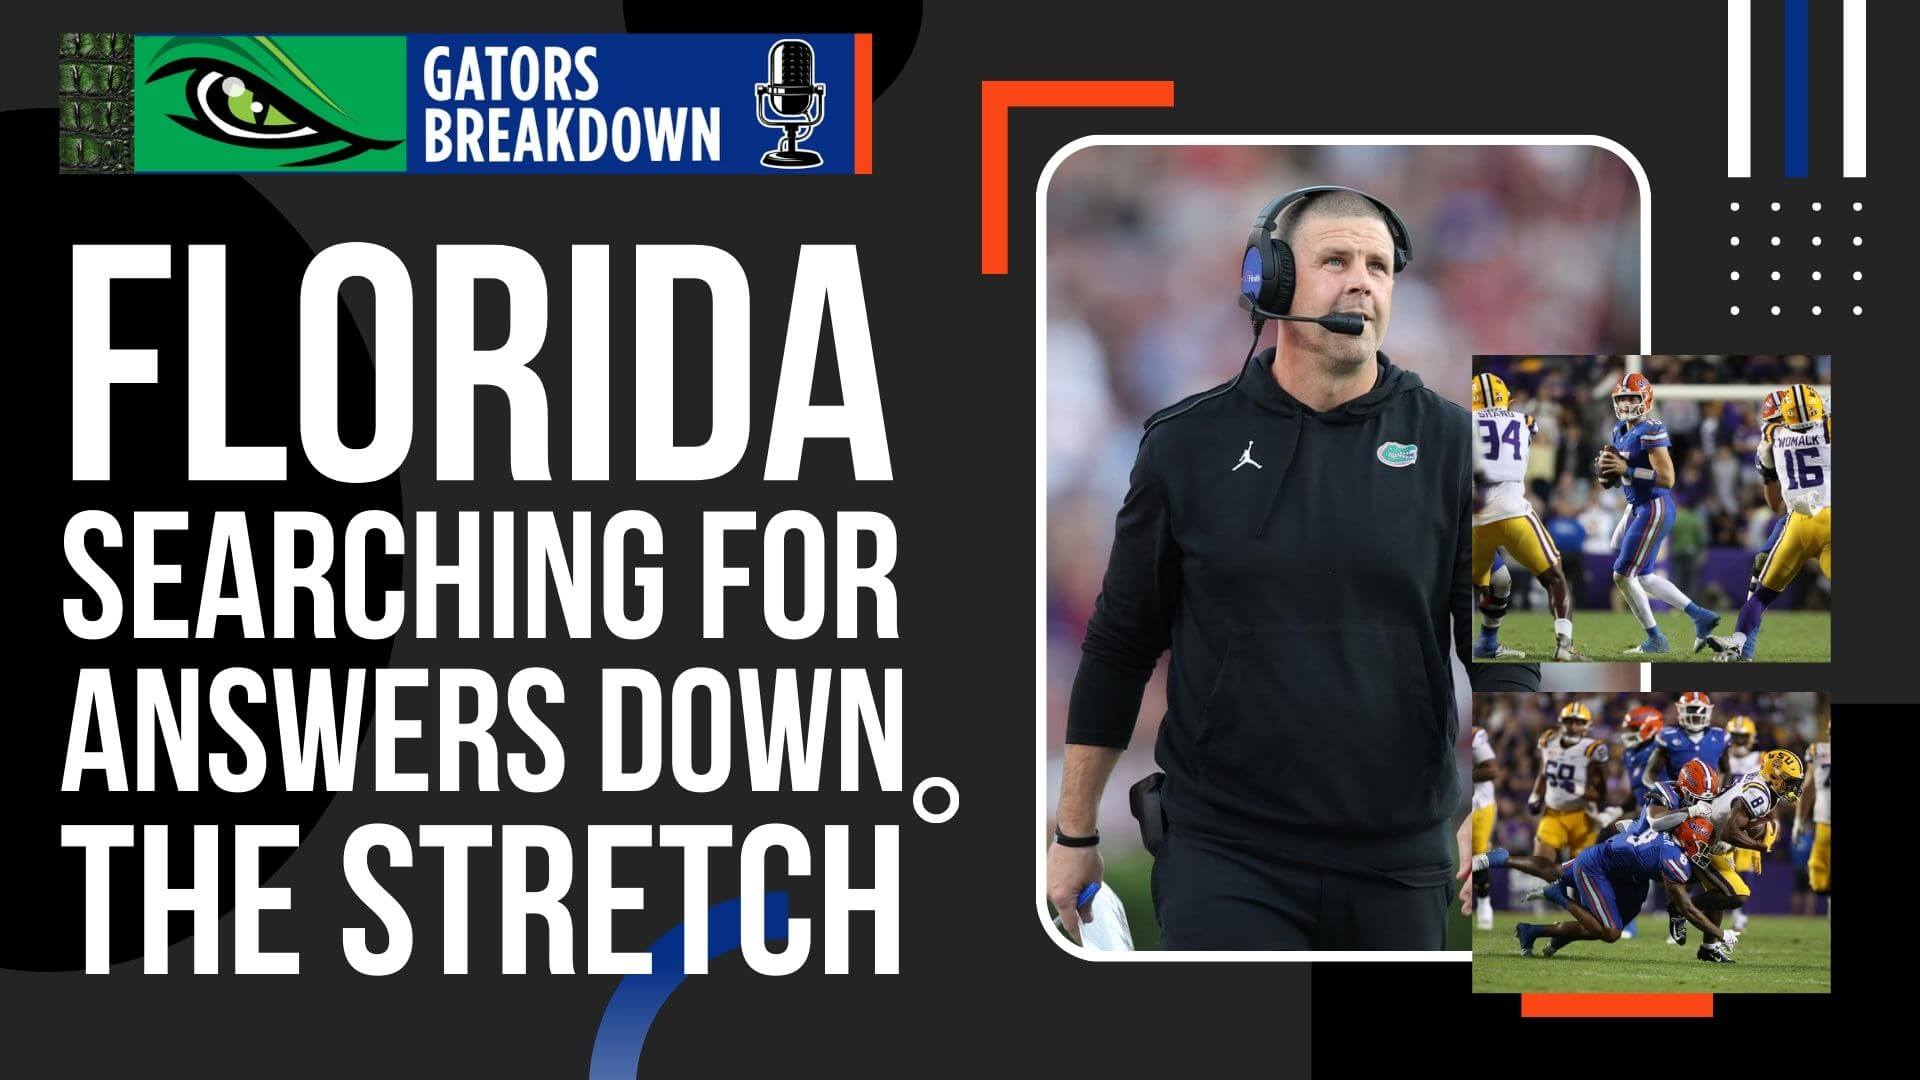 Florida Gators searching for answers